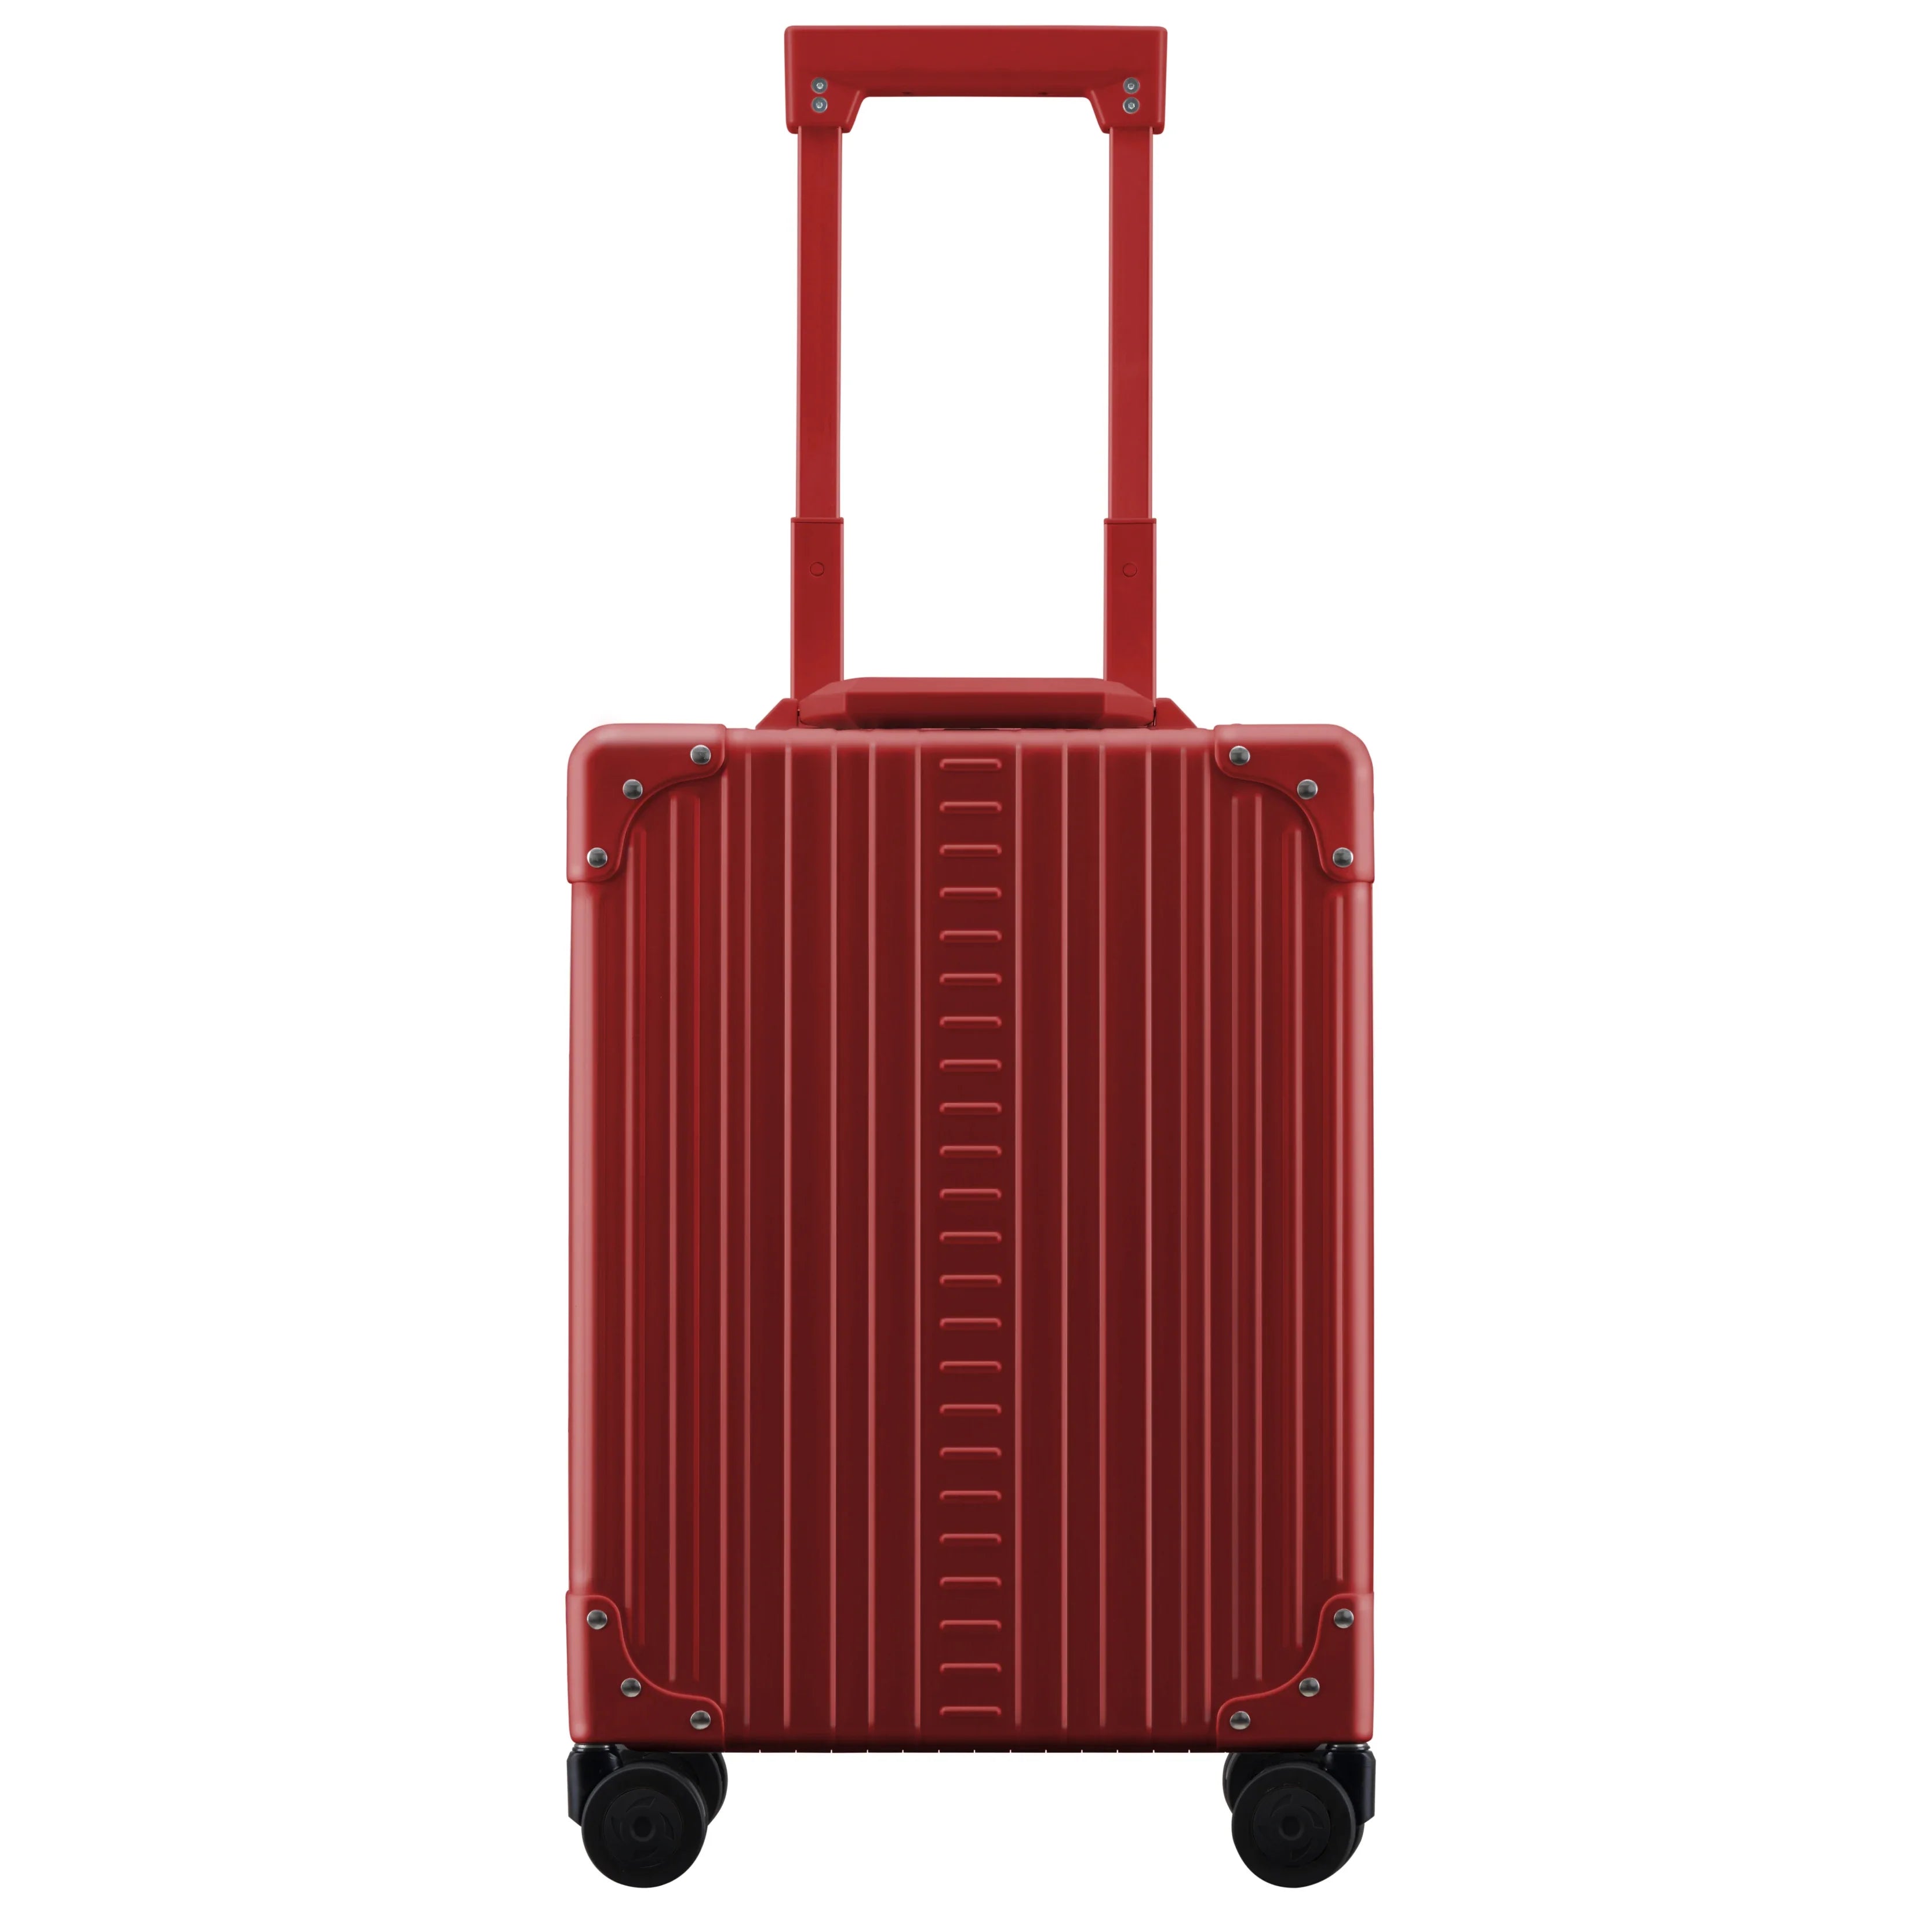 Aleon Vertical Business Carry-On 20 Zoll Kabinentrolley 49 cm - Sapphire